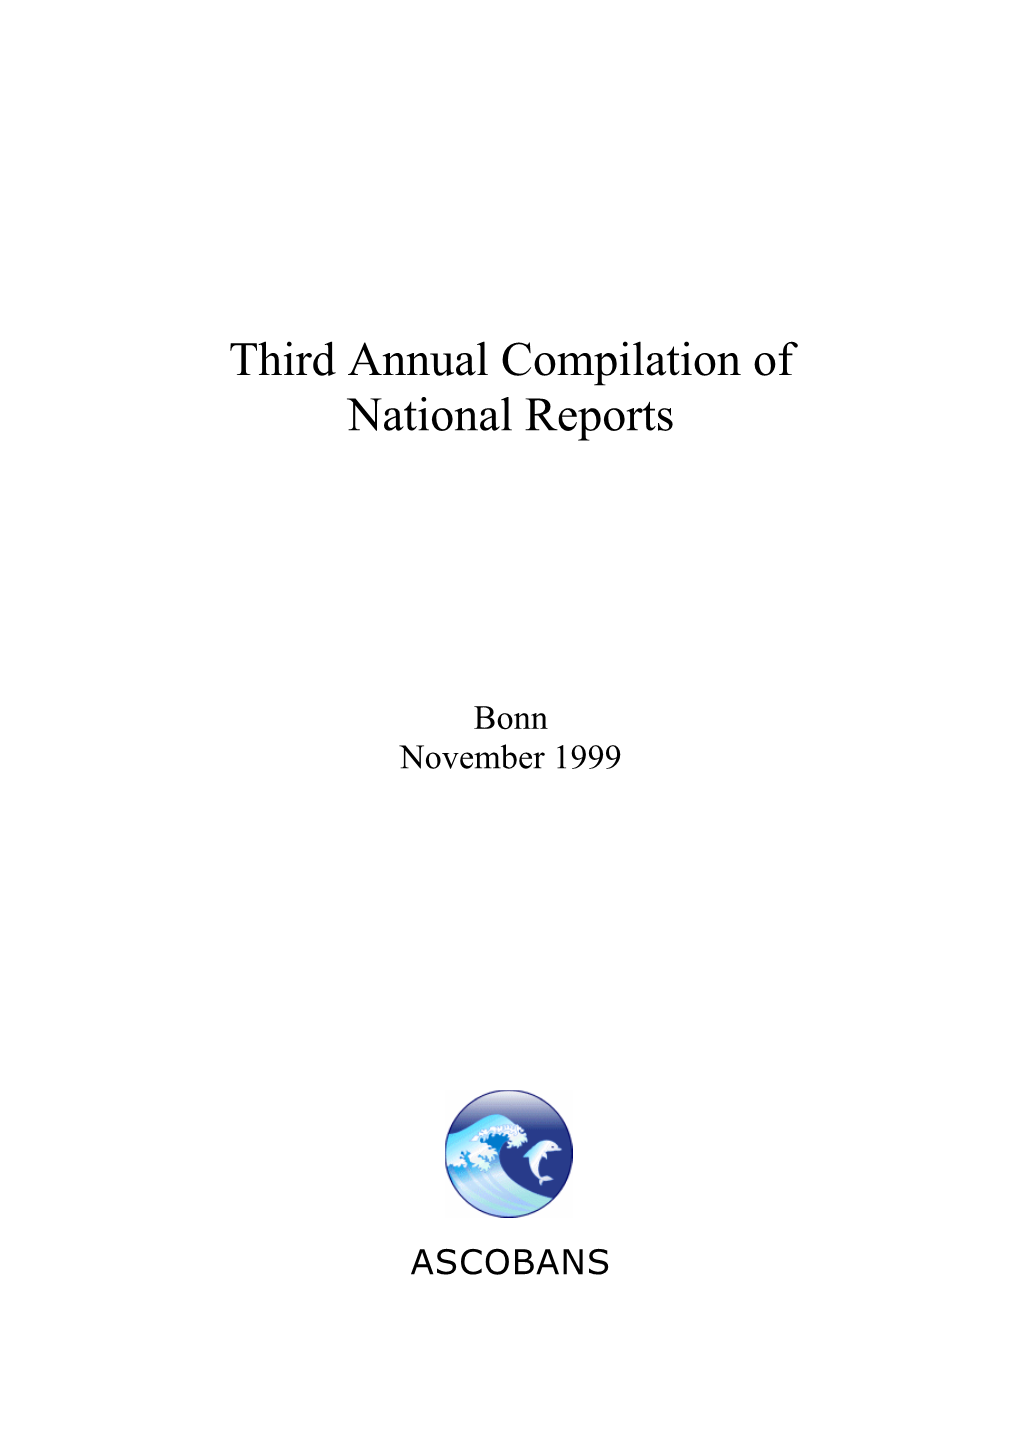 Third Annual Compilation of National Reports